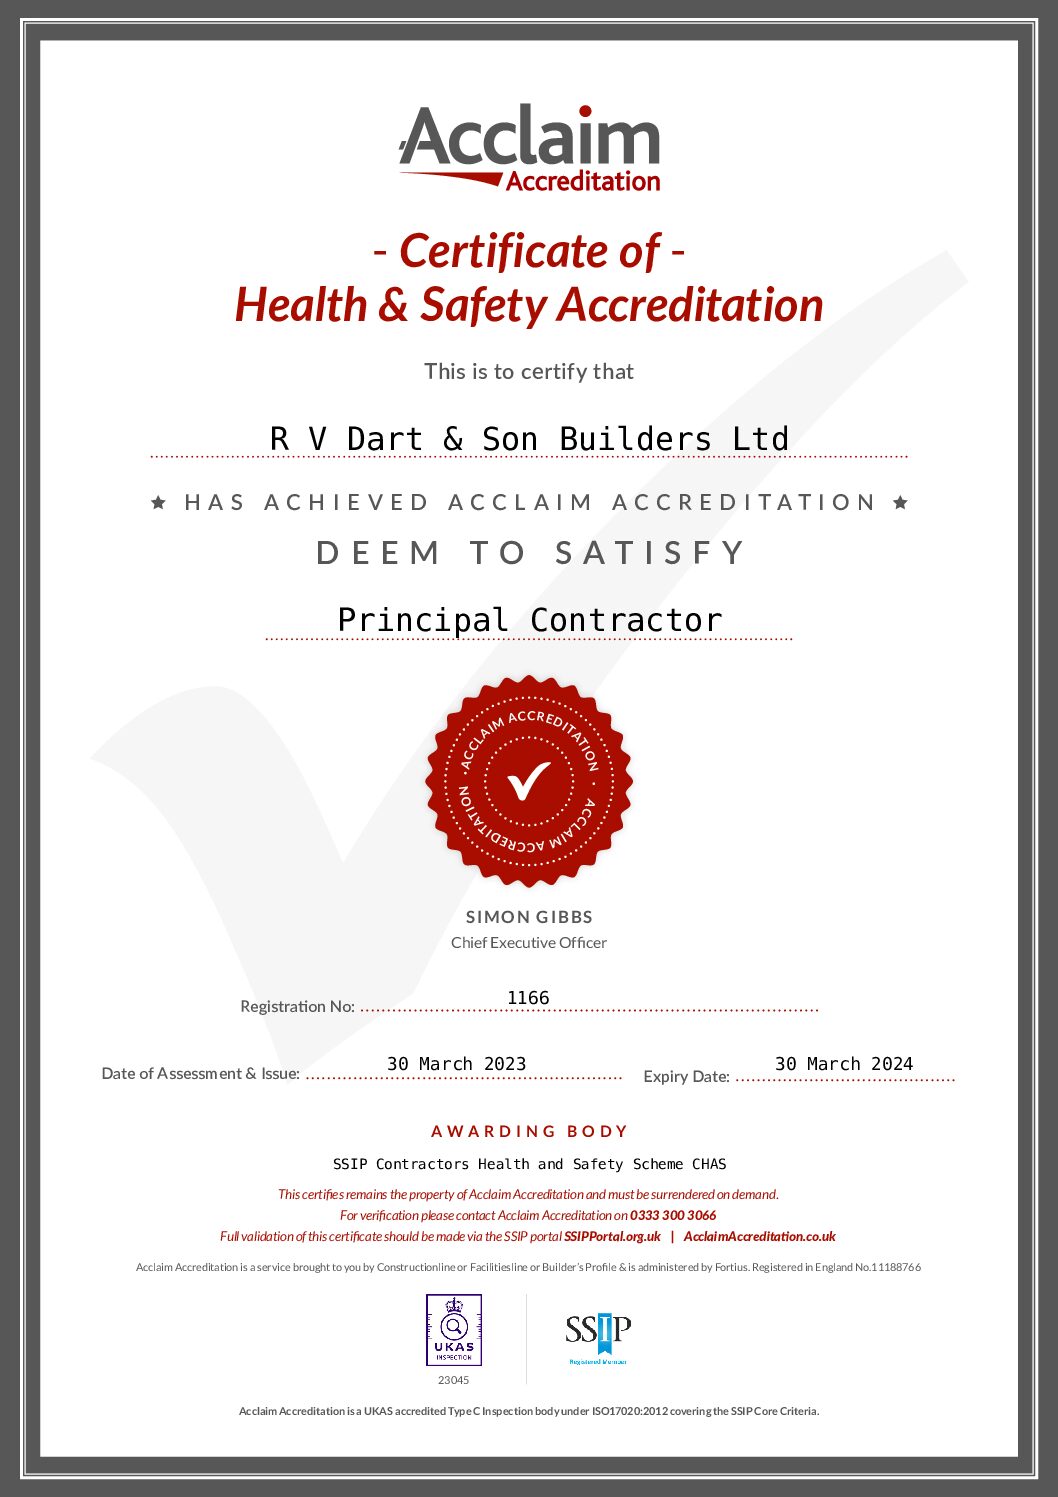 Constructionline-Certificate-of-H-S-Accreditation-4.4.23-pdf.jpg